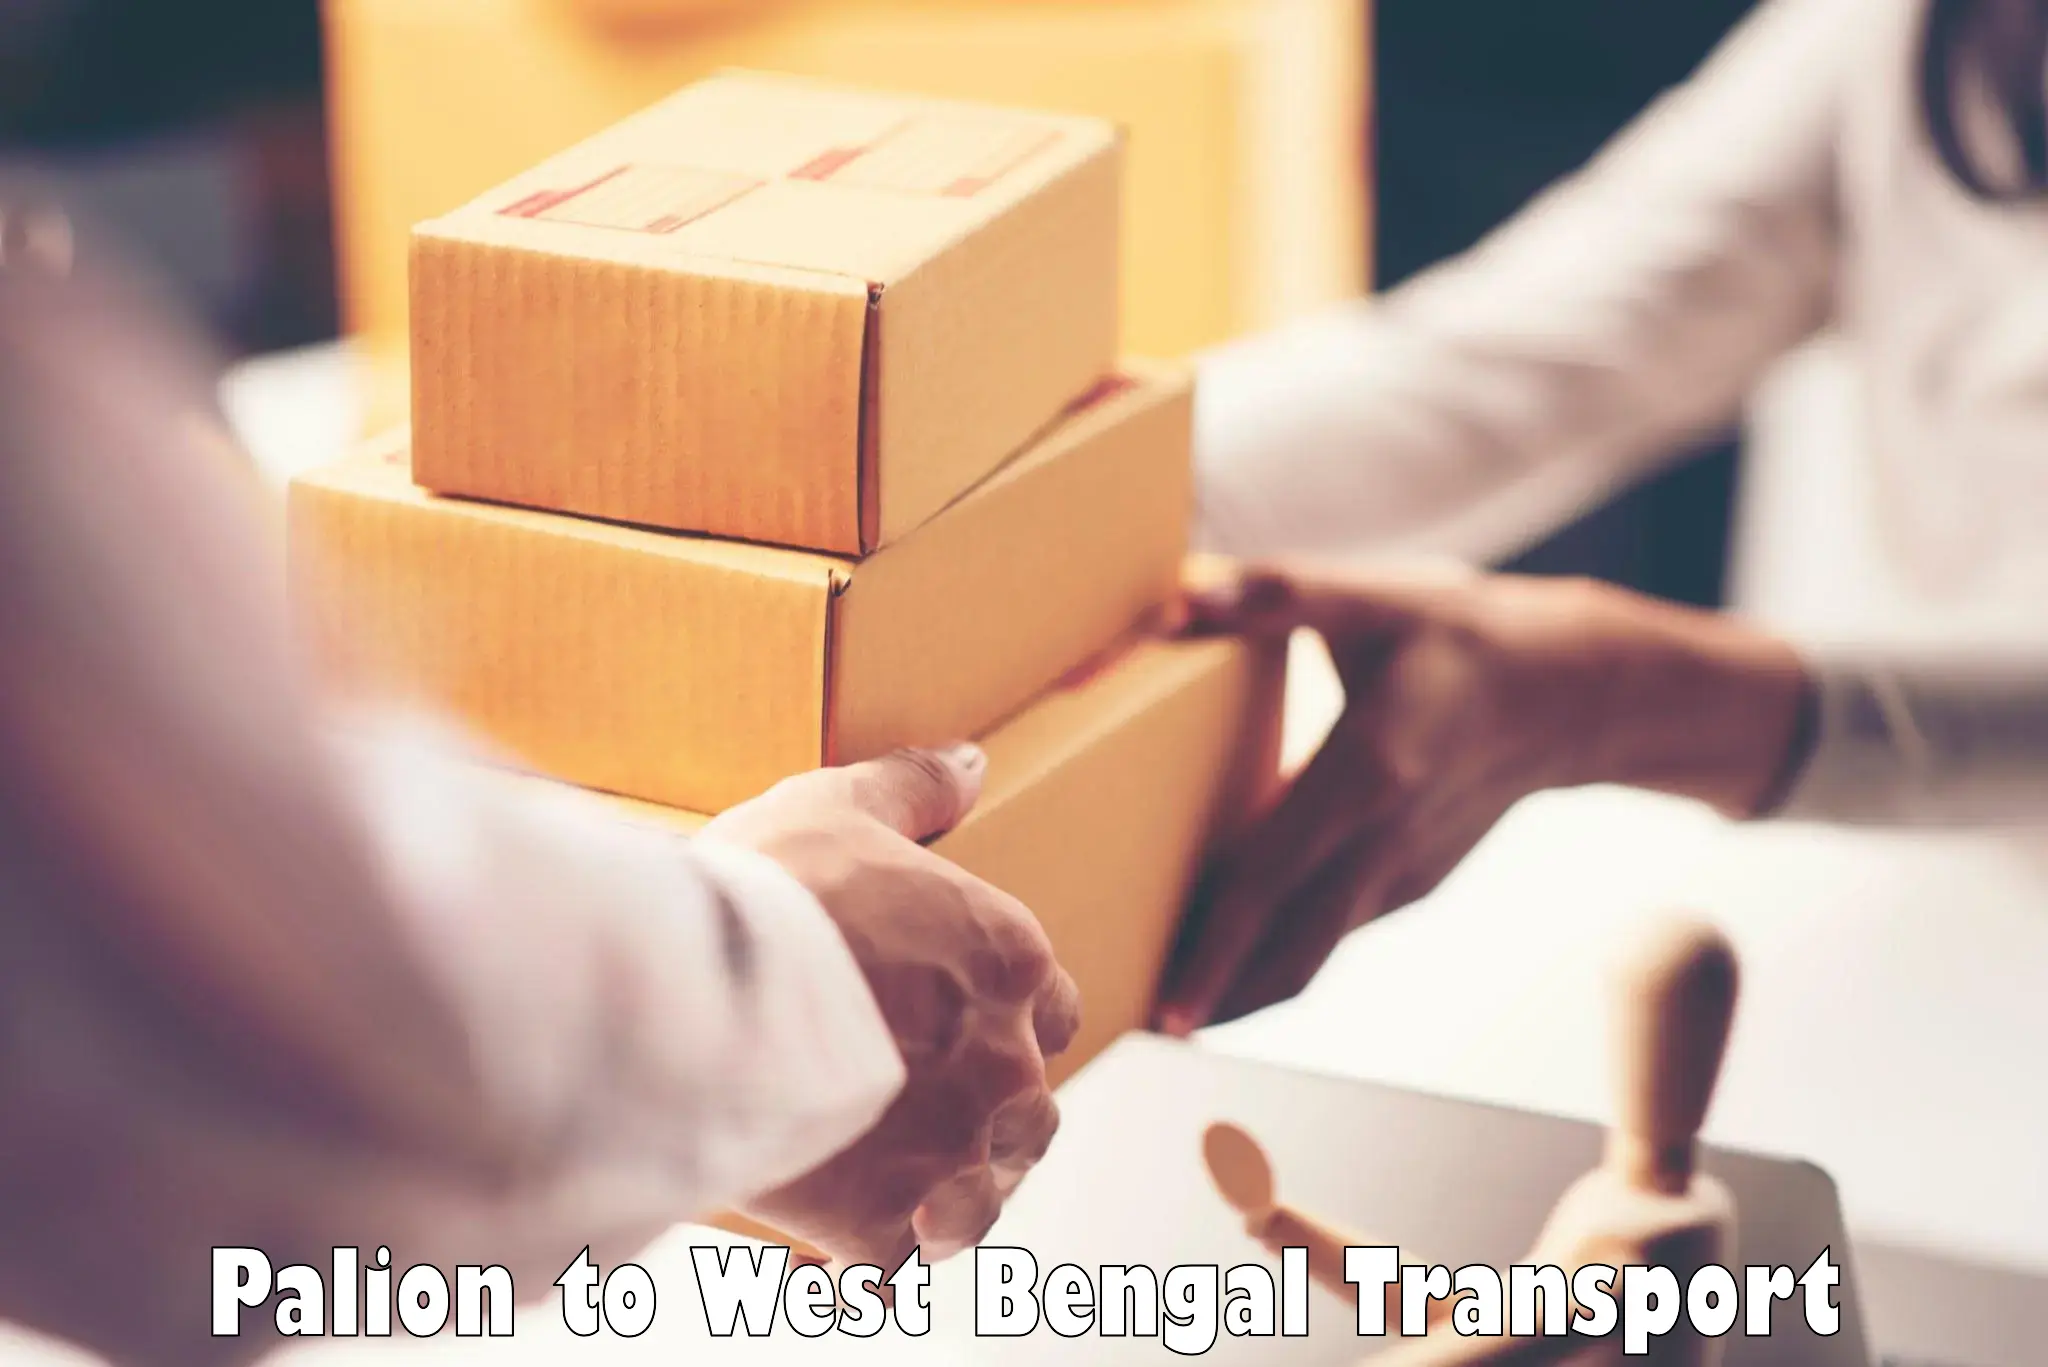 Online transport service Palion to West Bengal